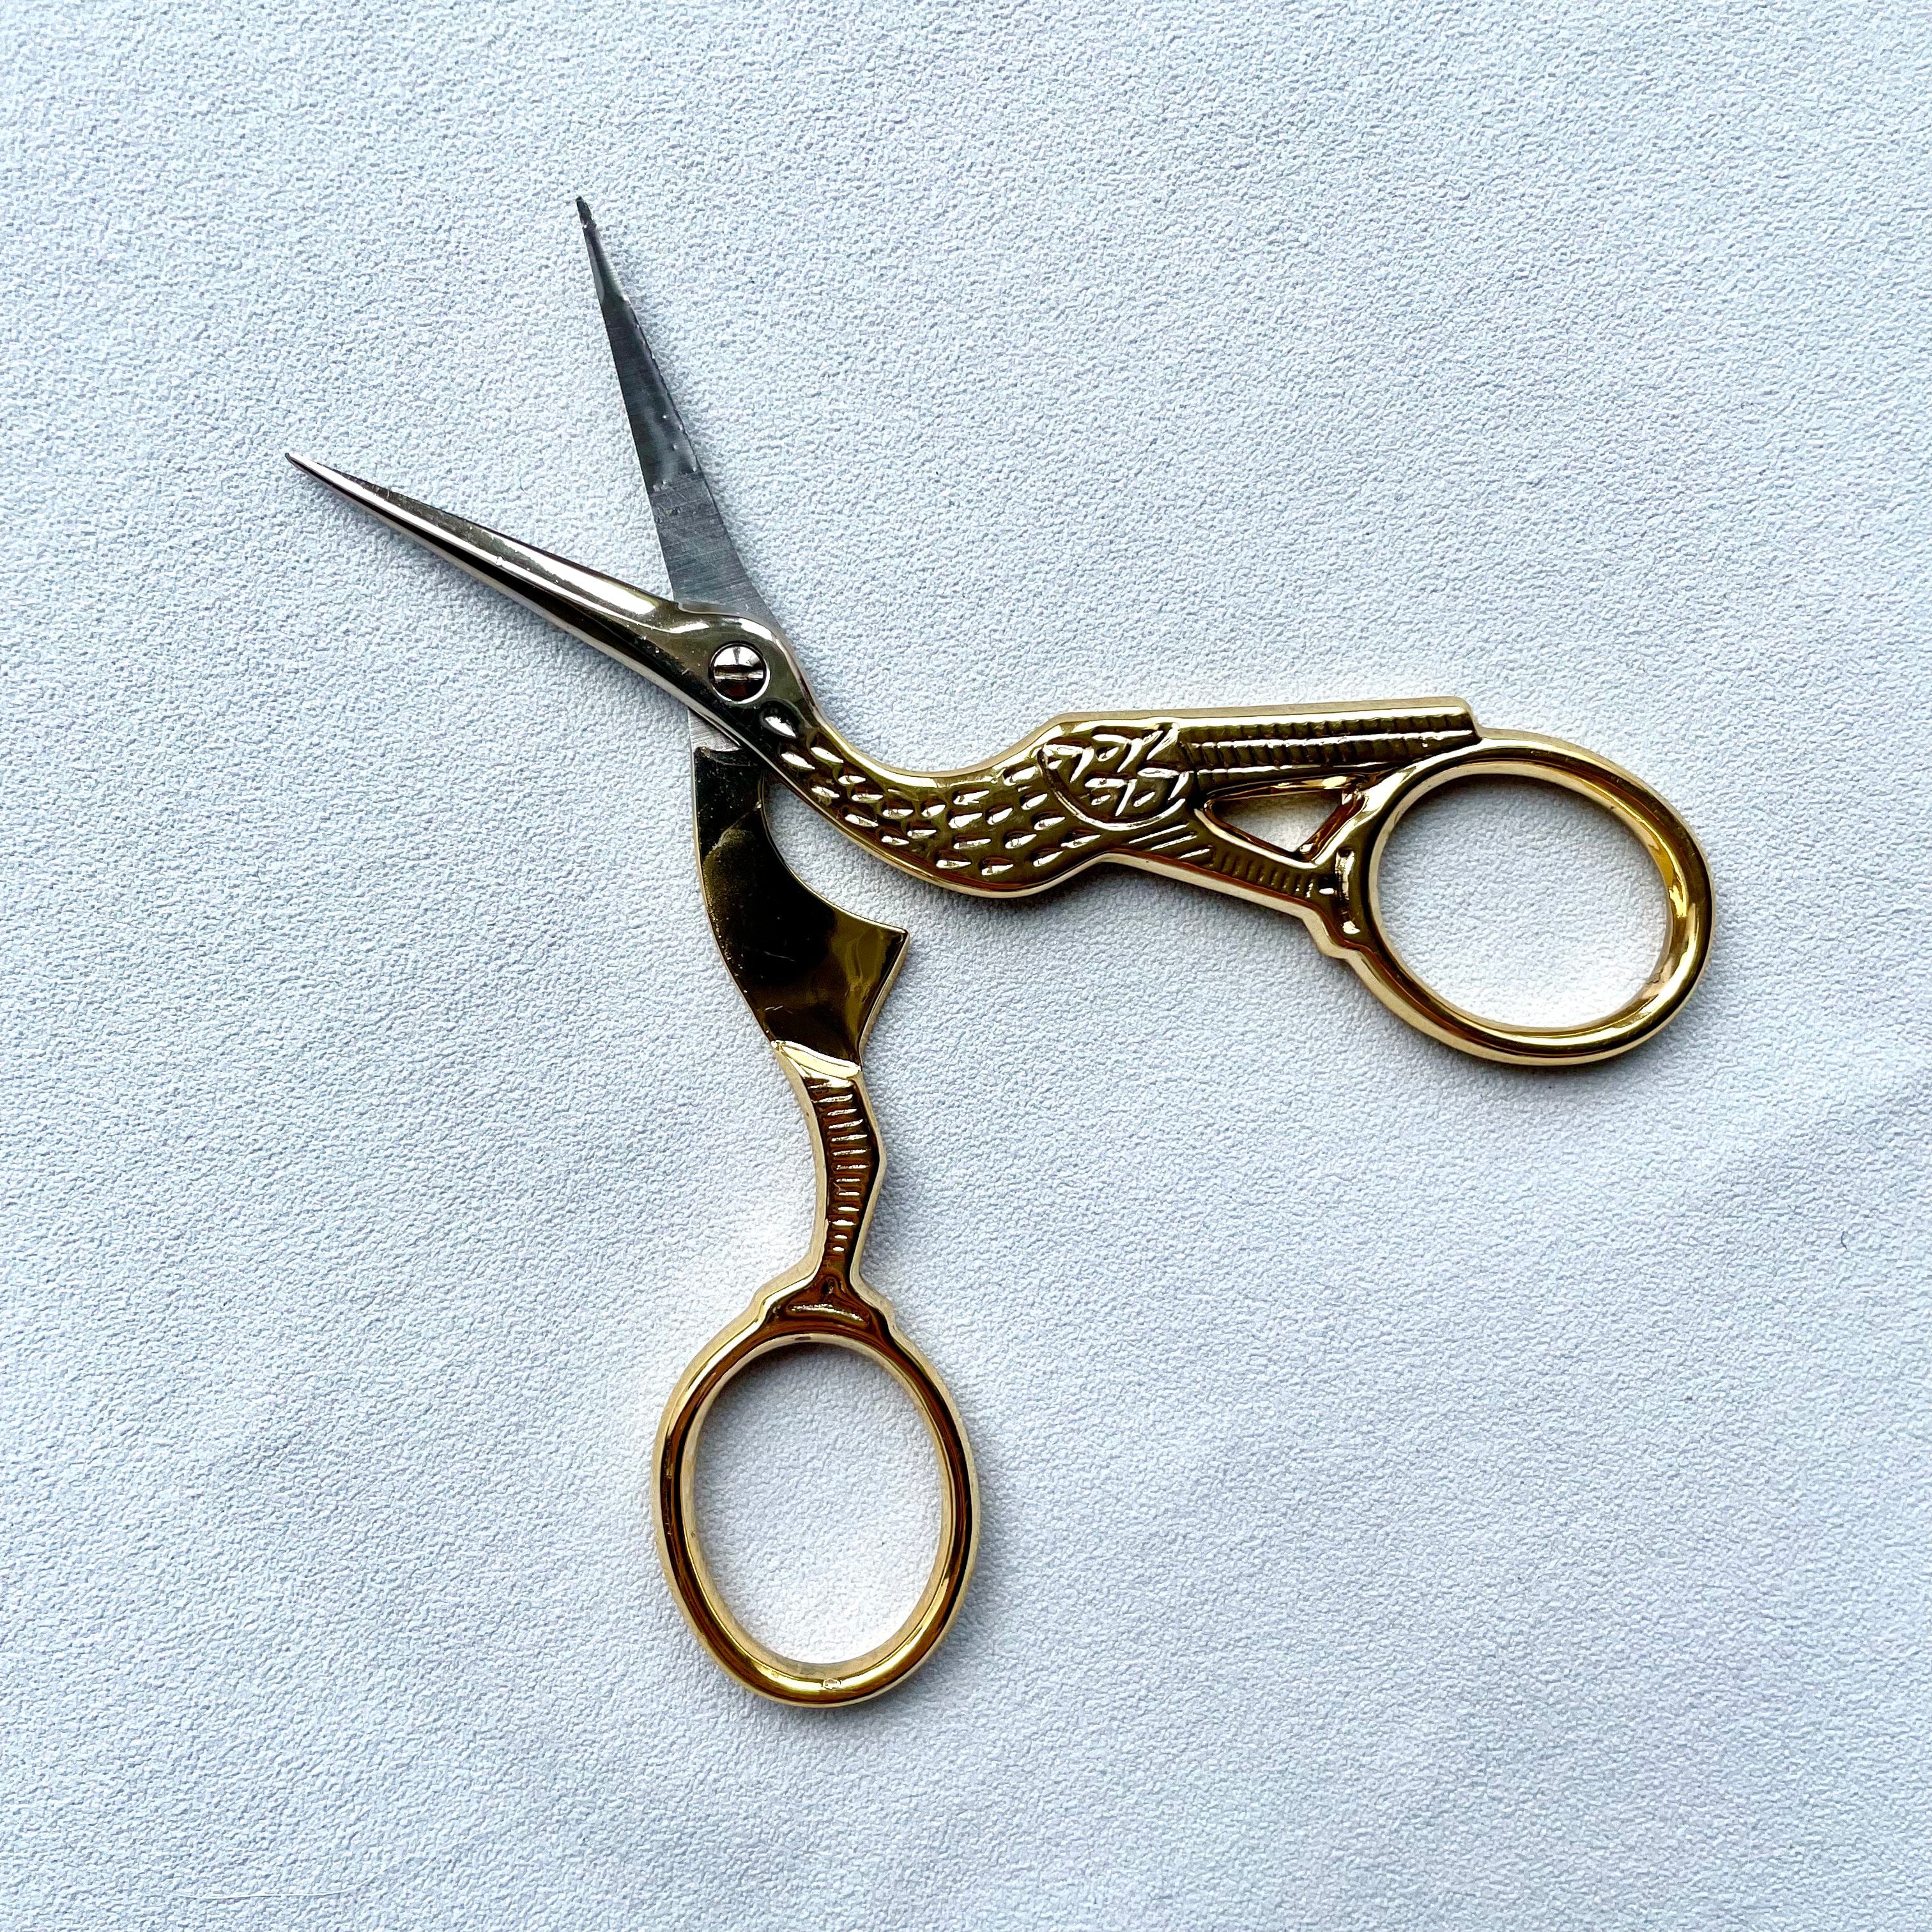 Stainless Steel Stork Embroidery Scissors With Muud Case